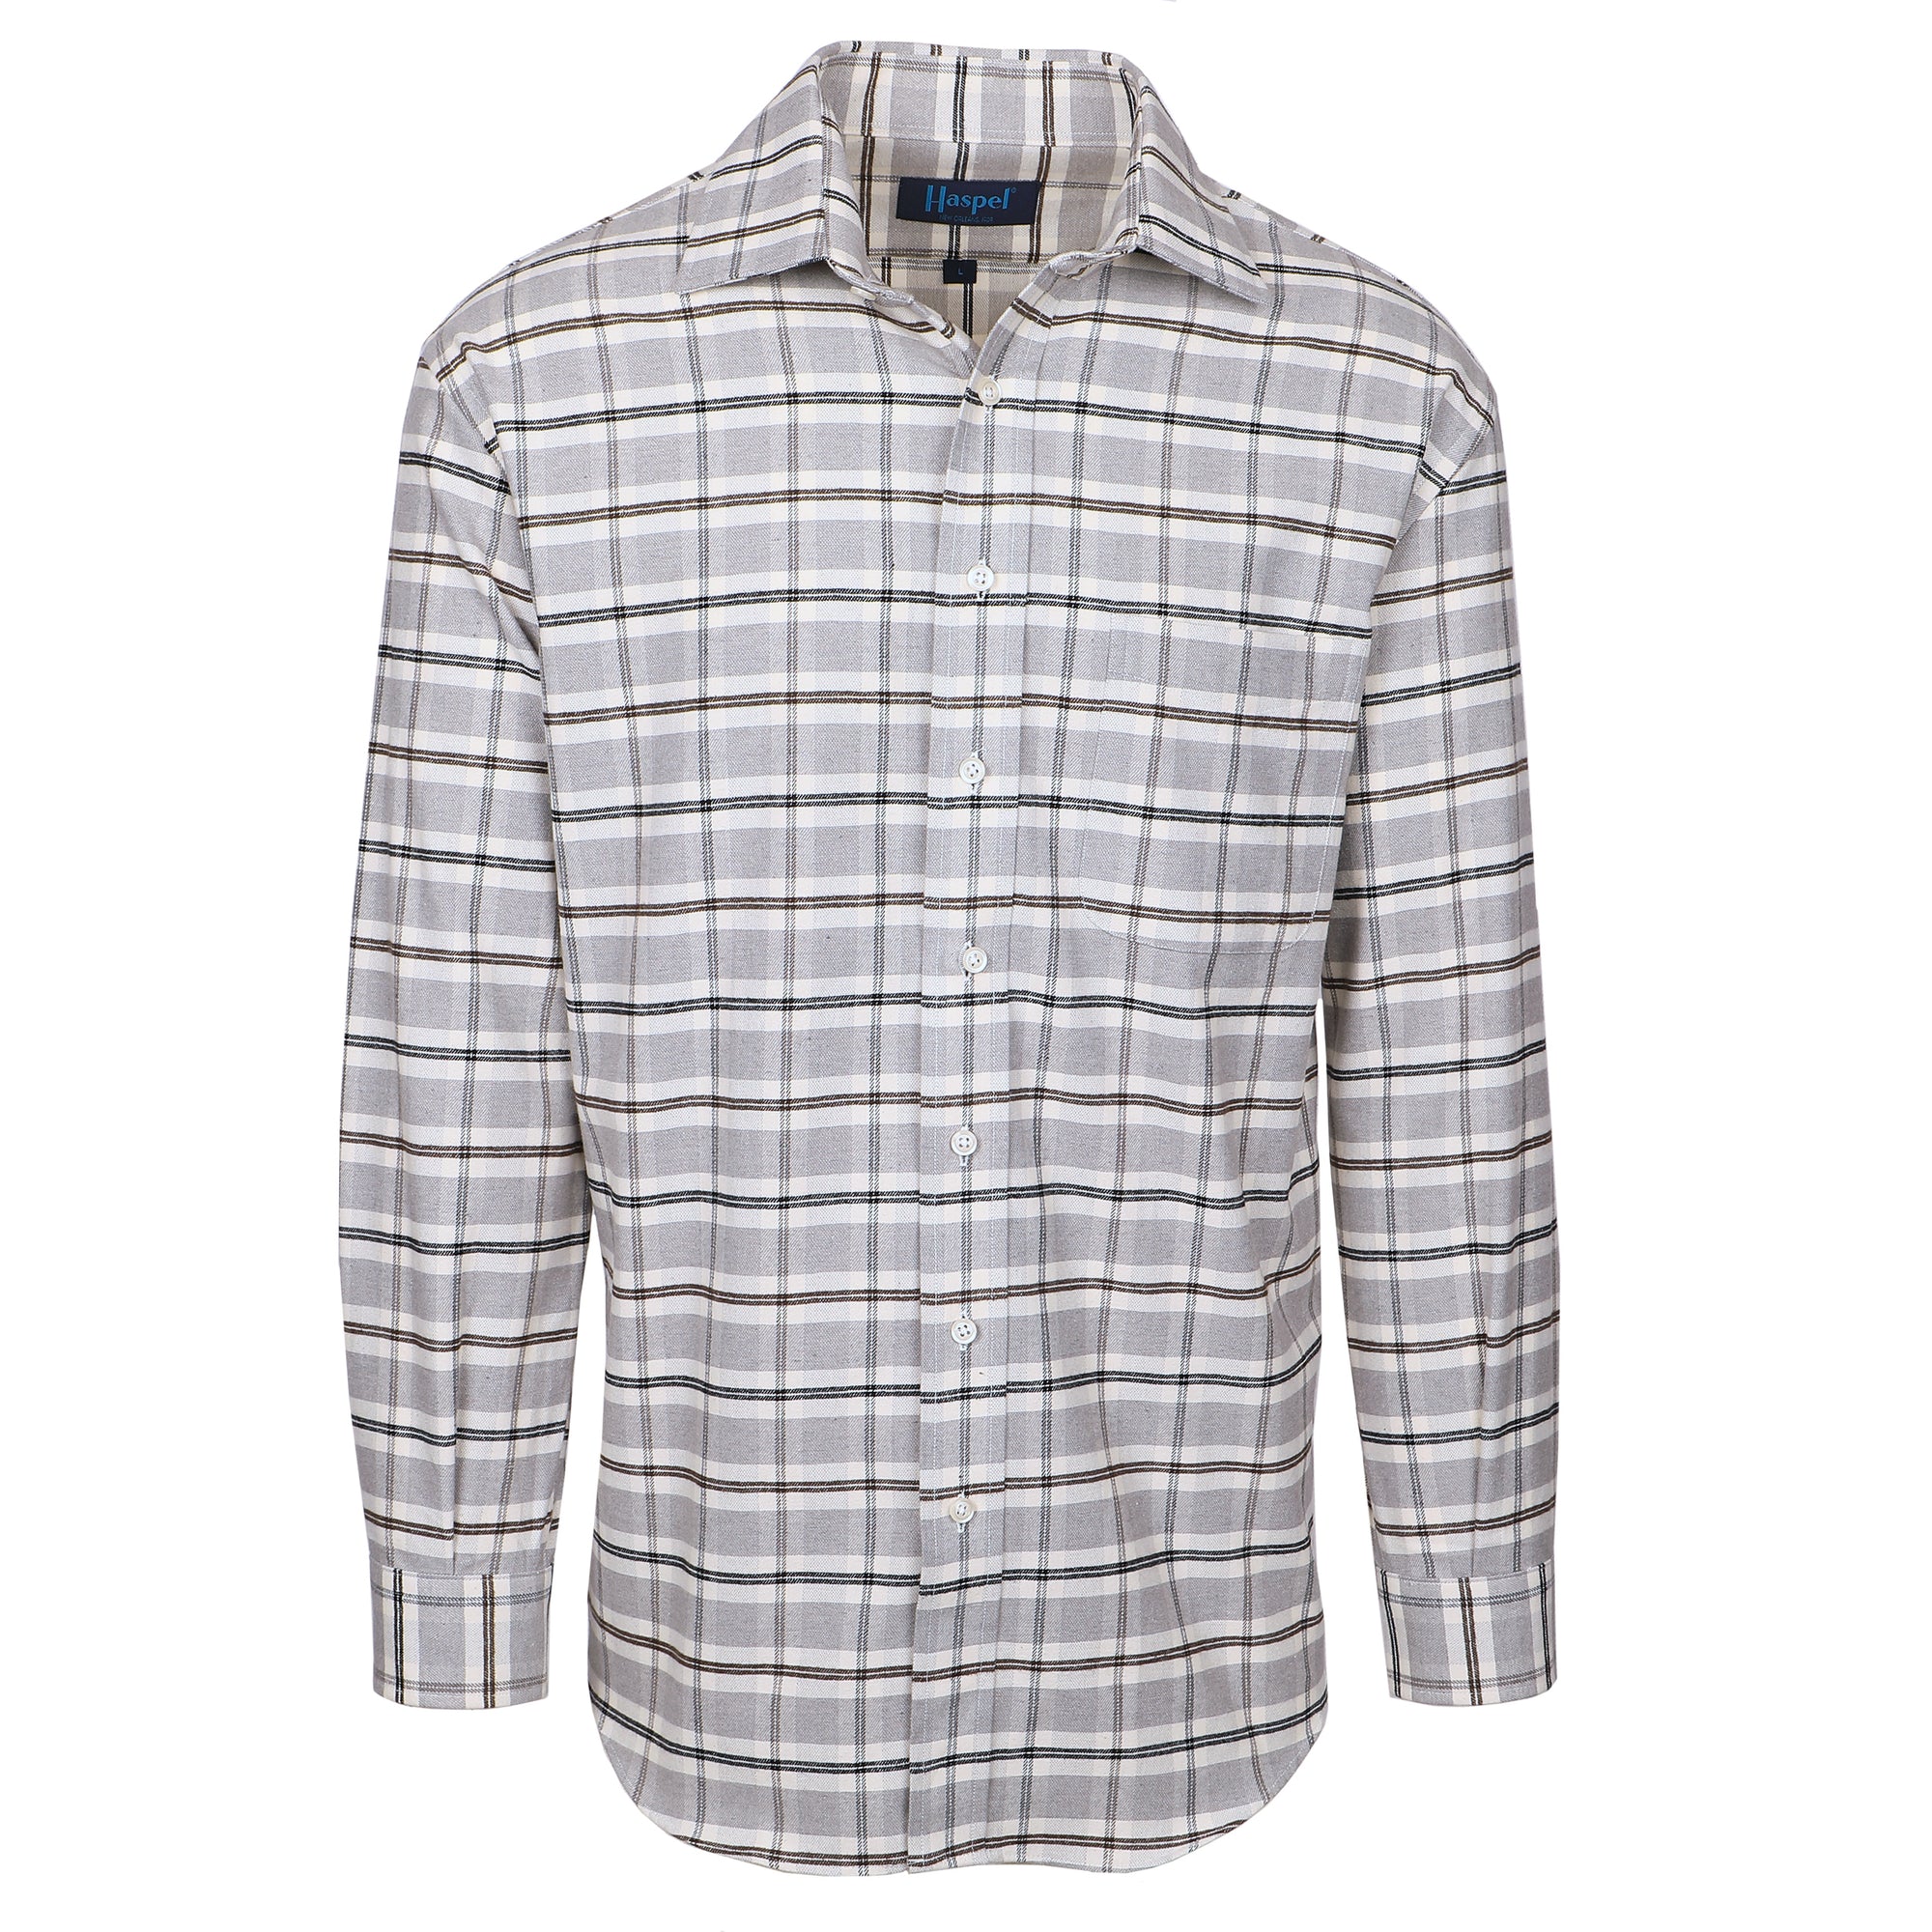 Kick it in neutral gray plaid. Classic style and brushed cotton for comfort.  100% Cotton • Long Sleeve • Spread Collar • Chest Pocket • Classic Fit 